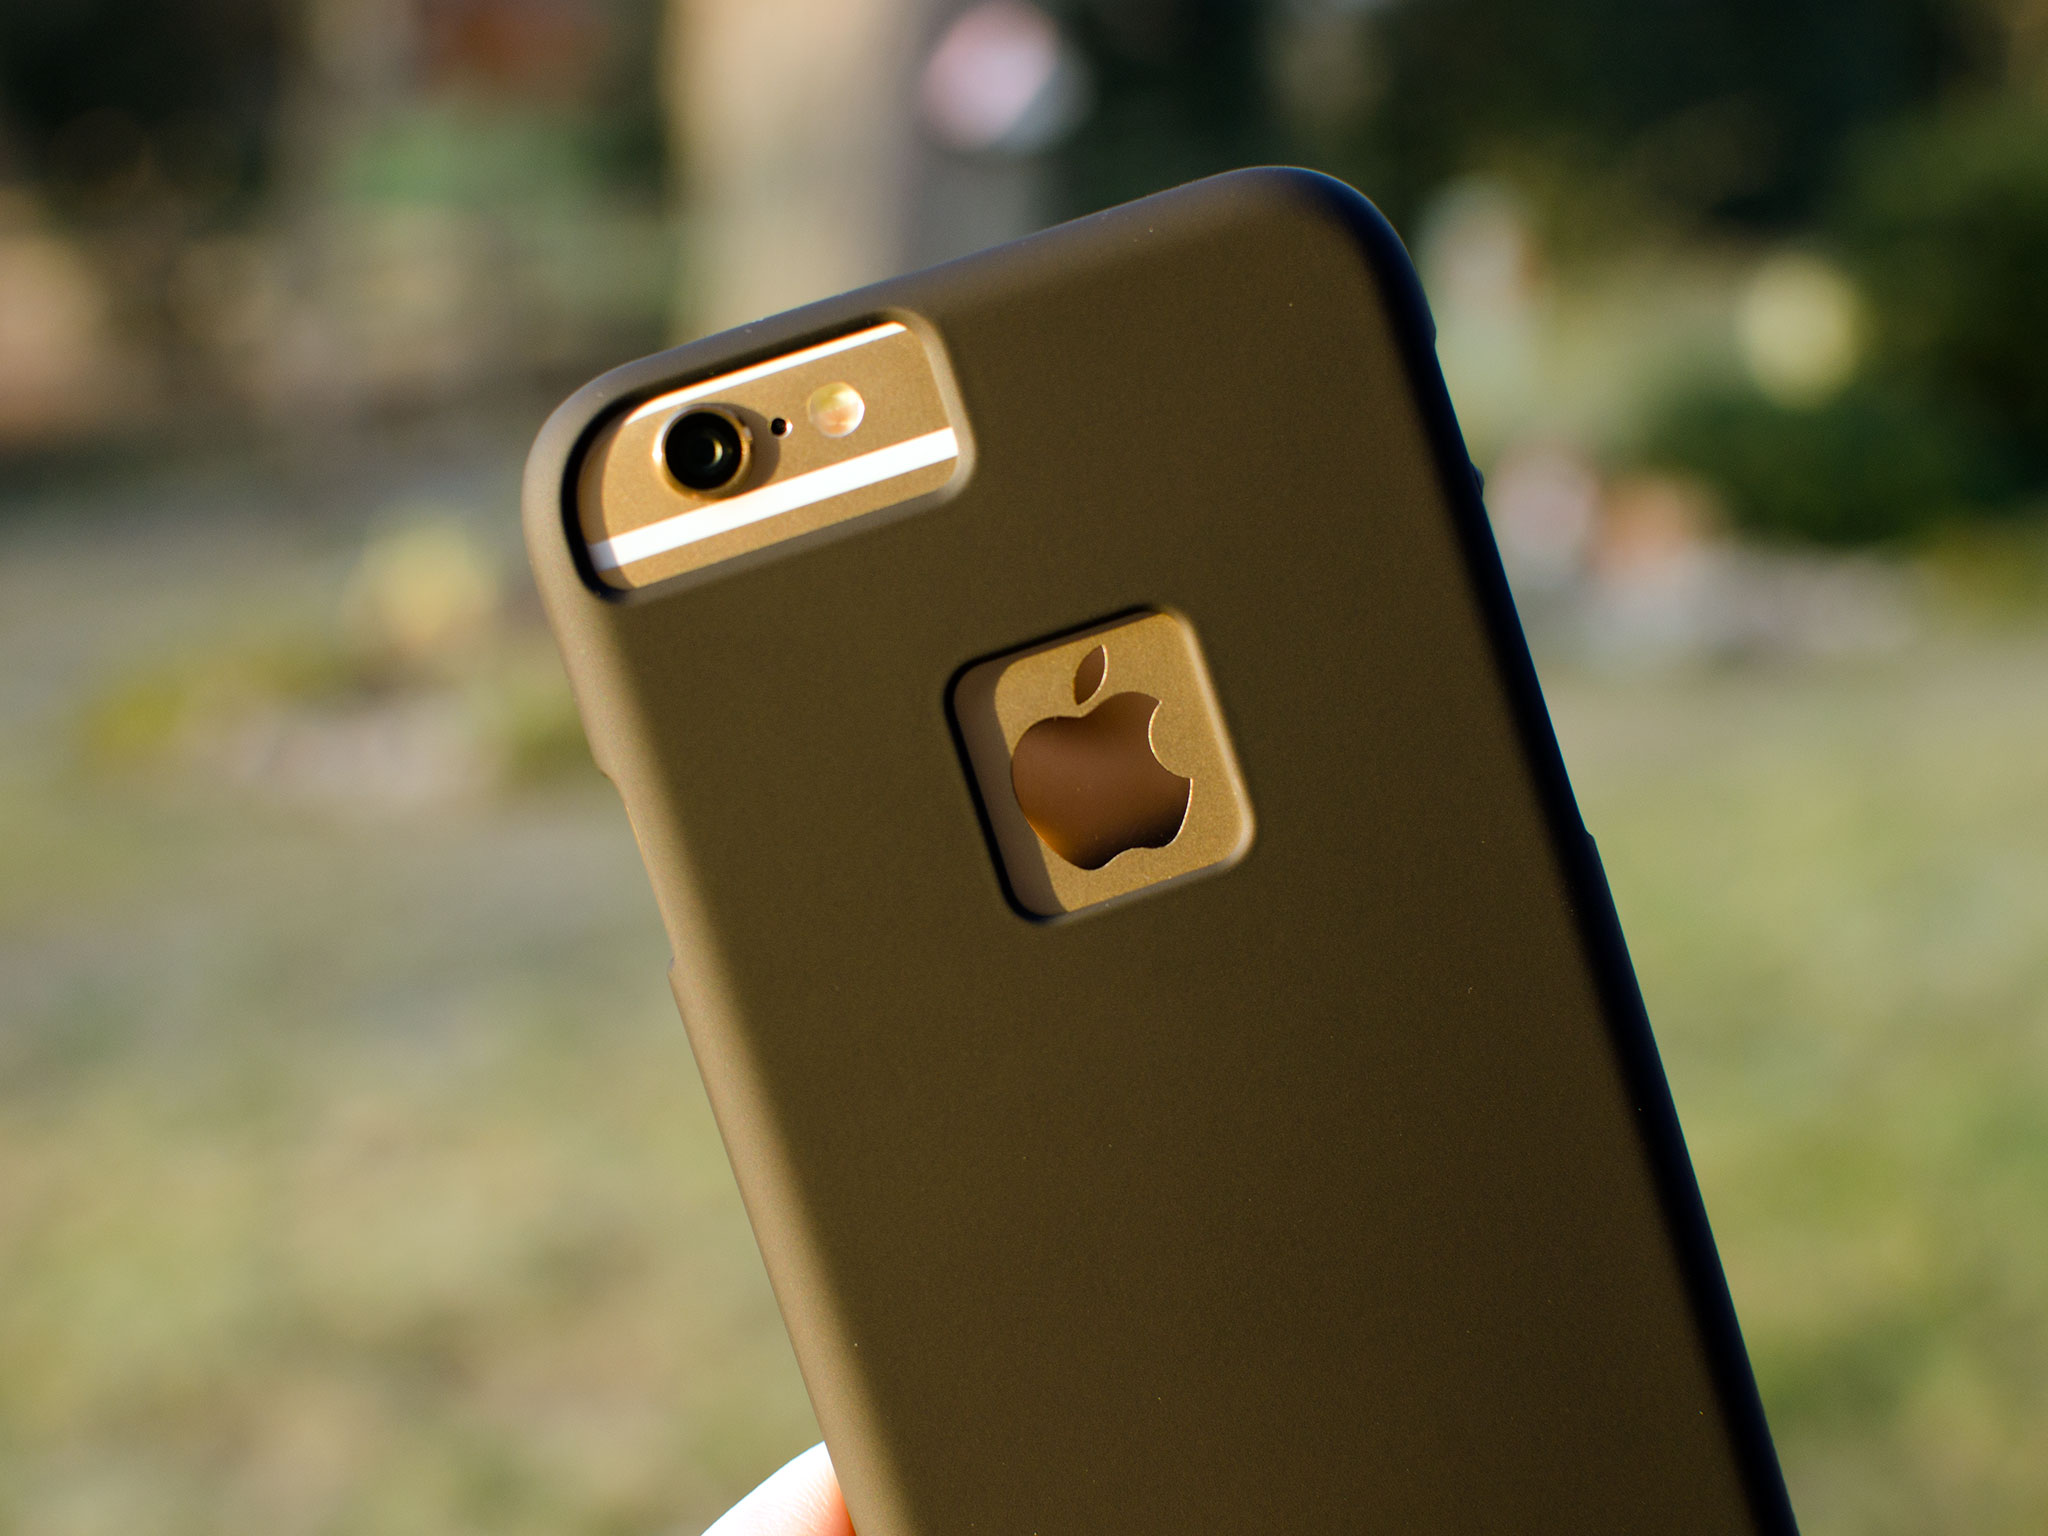 Case-Mate Barely There Review: The iPhone 6 case for case-haters!